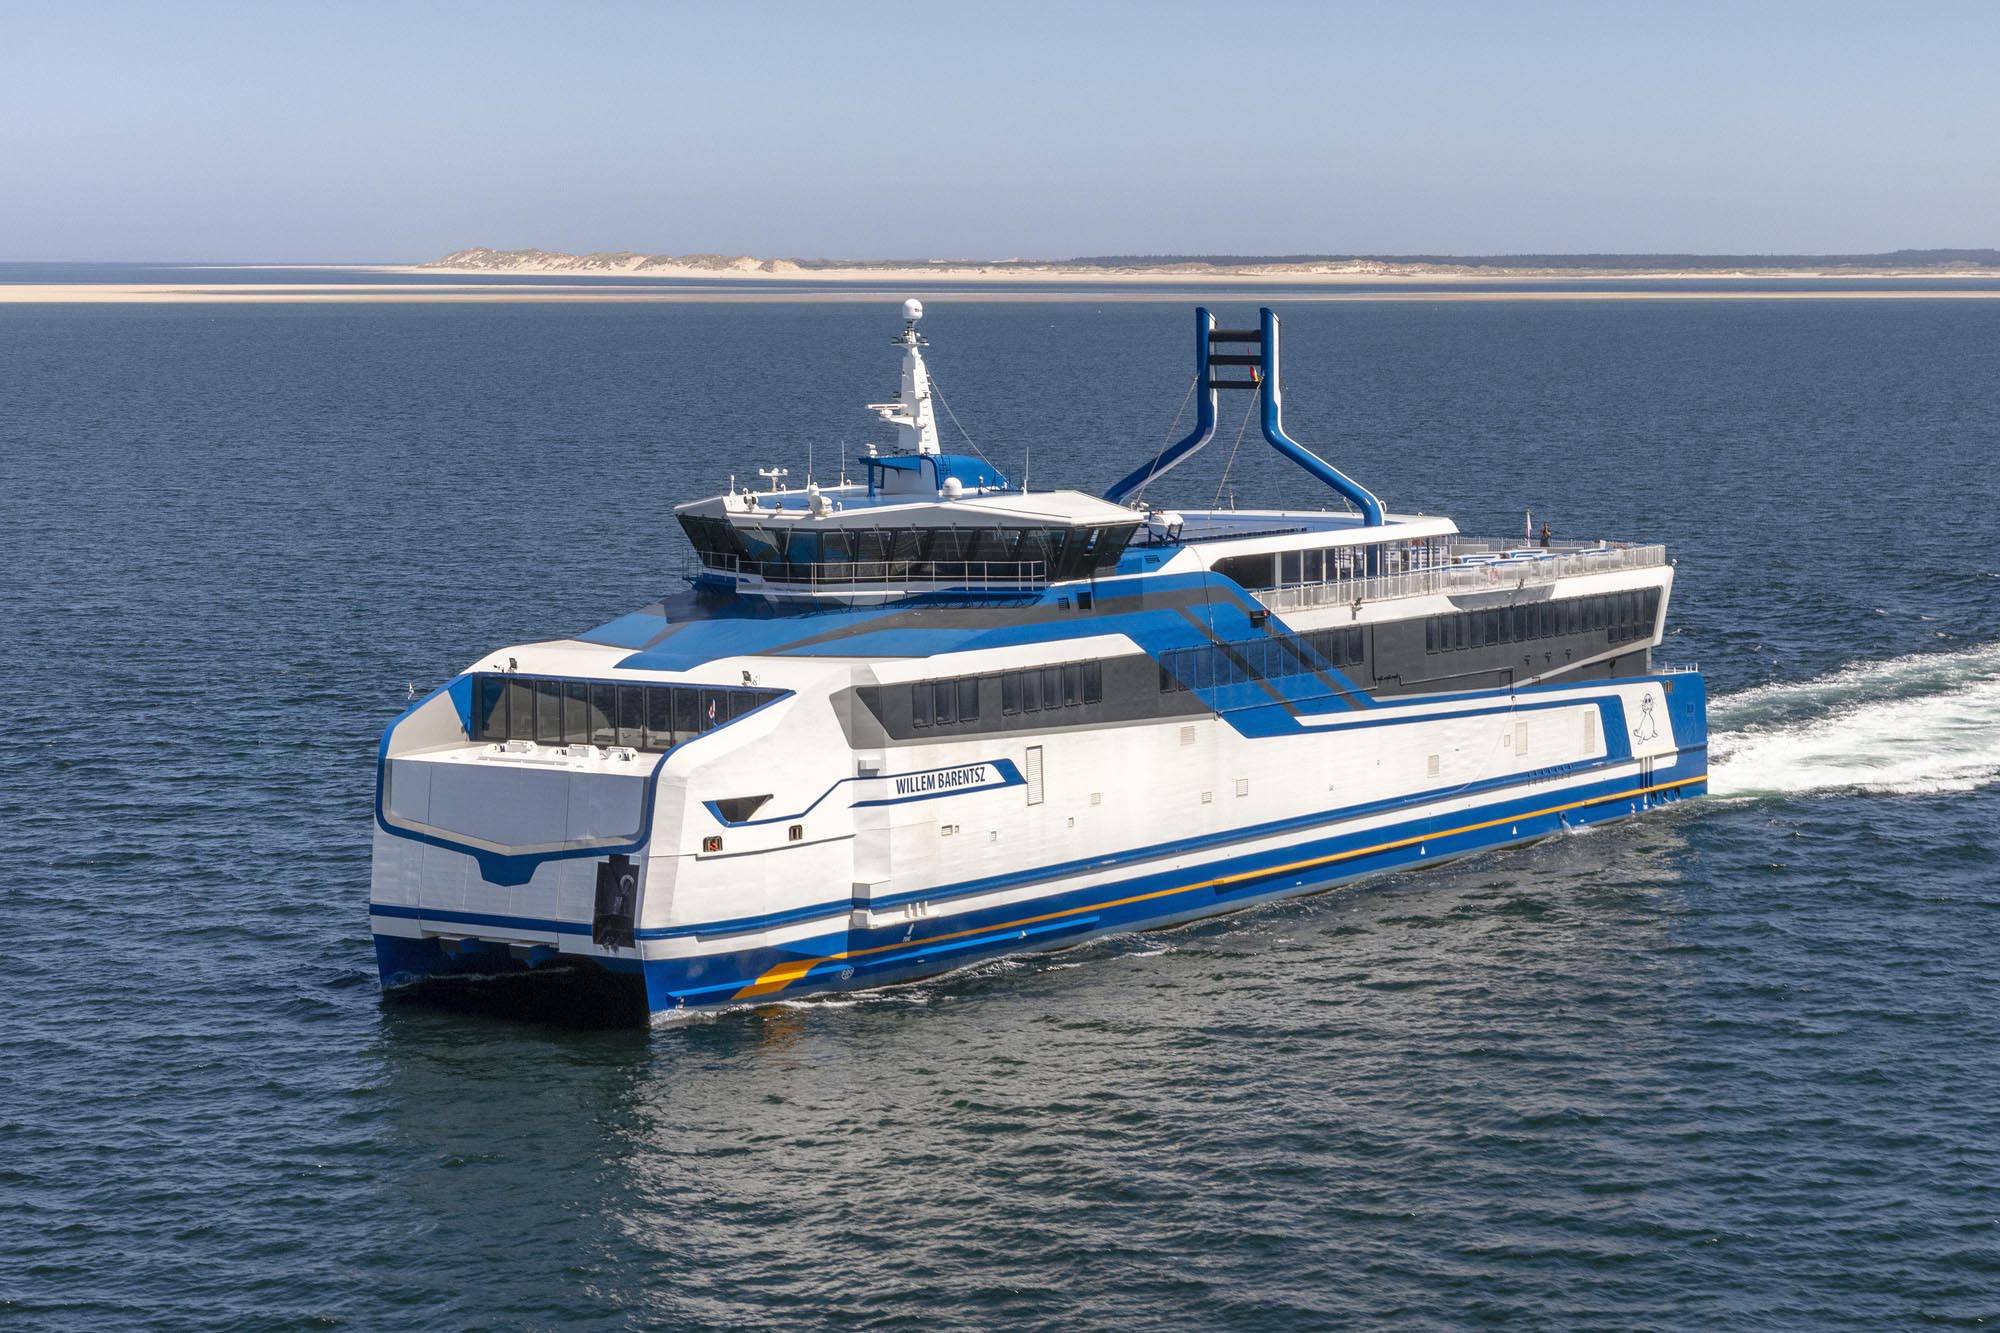 RoPax ferry powered by LNG completes trials at sea